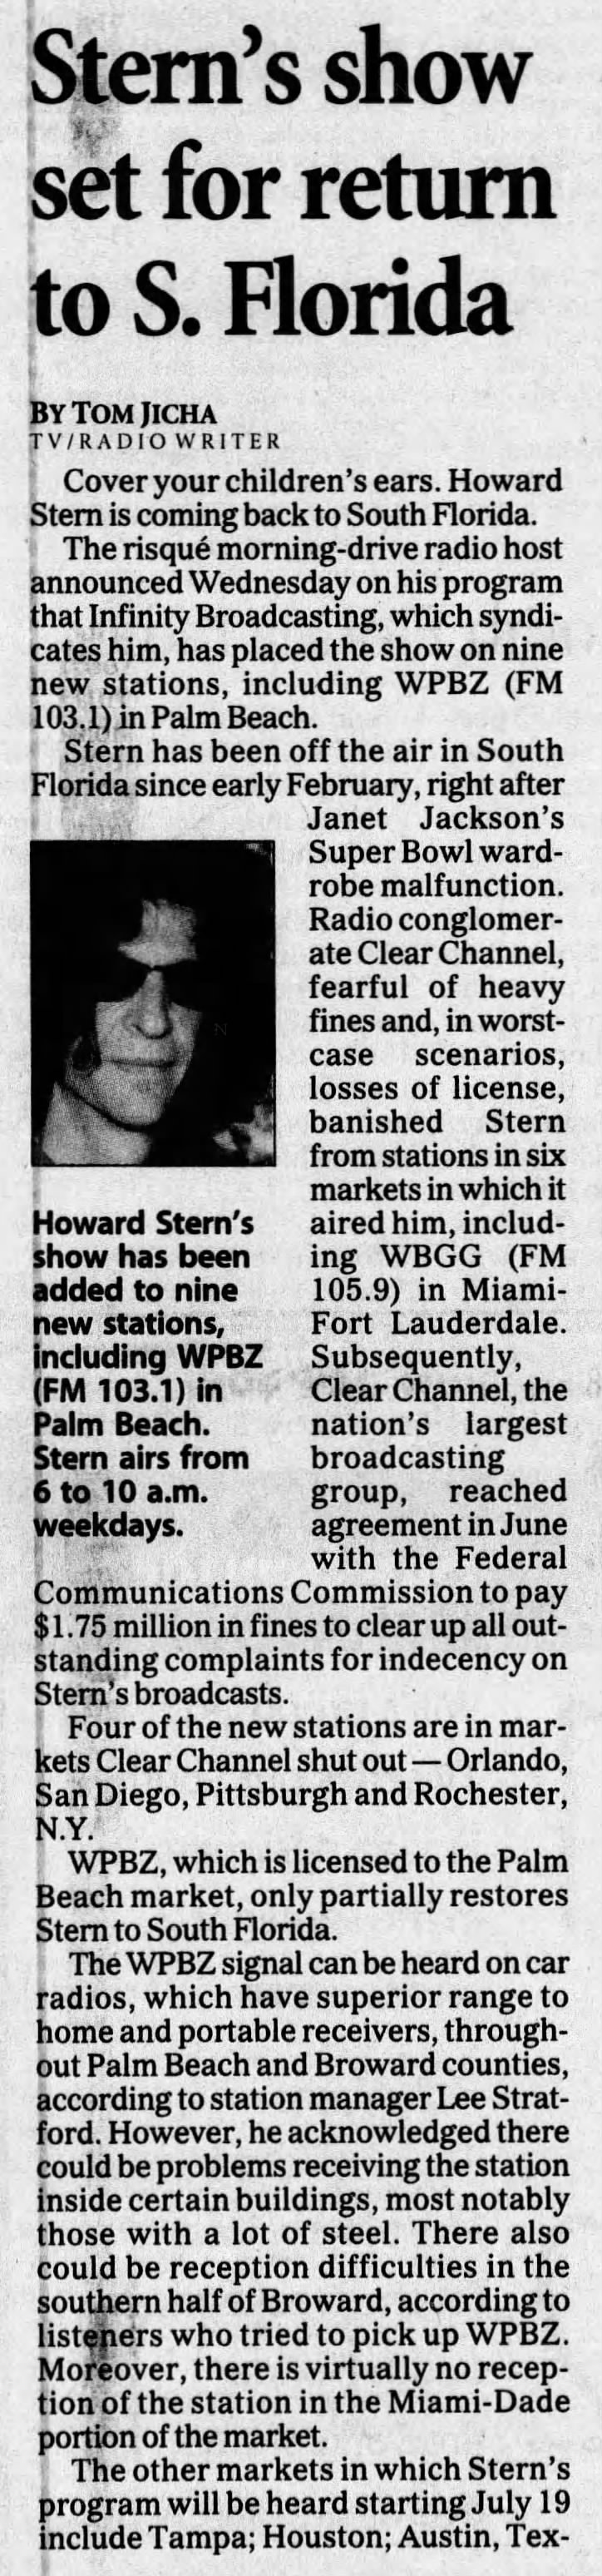 Stern's show set for return to S. Florida